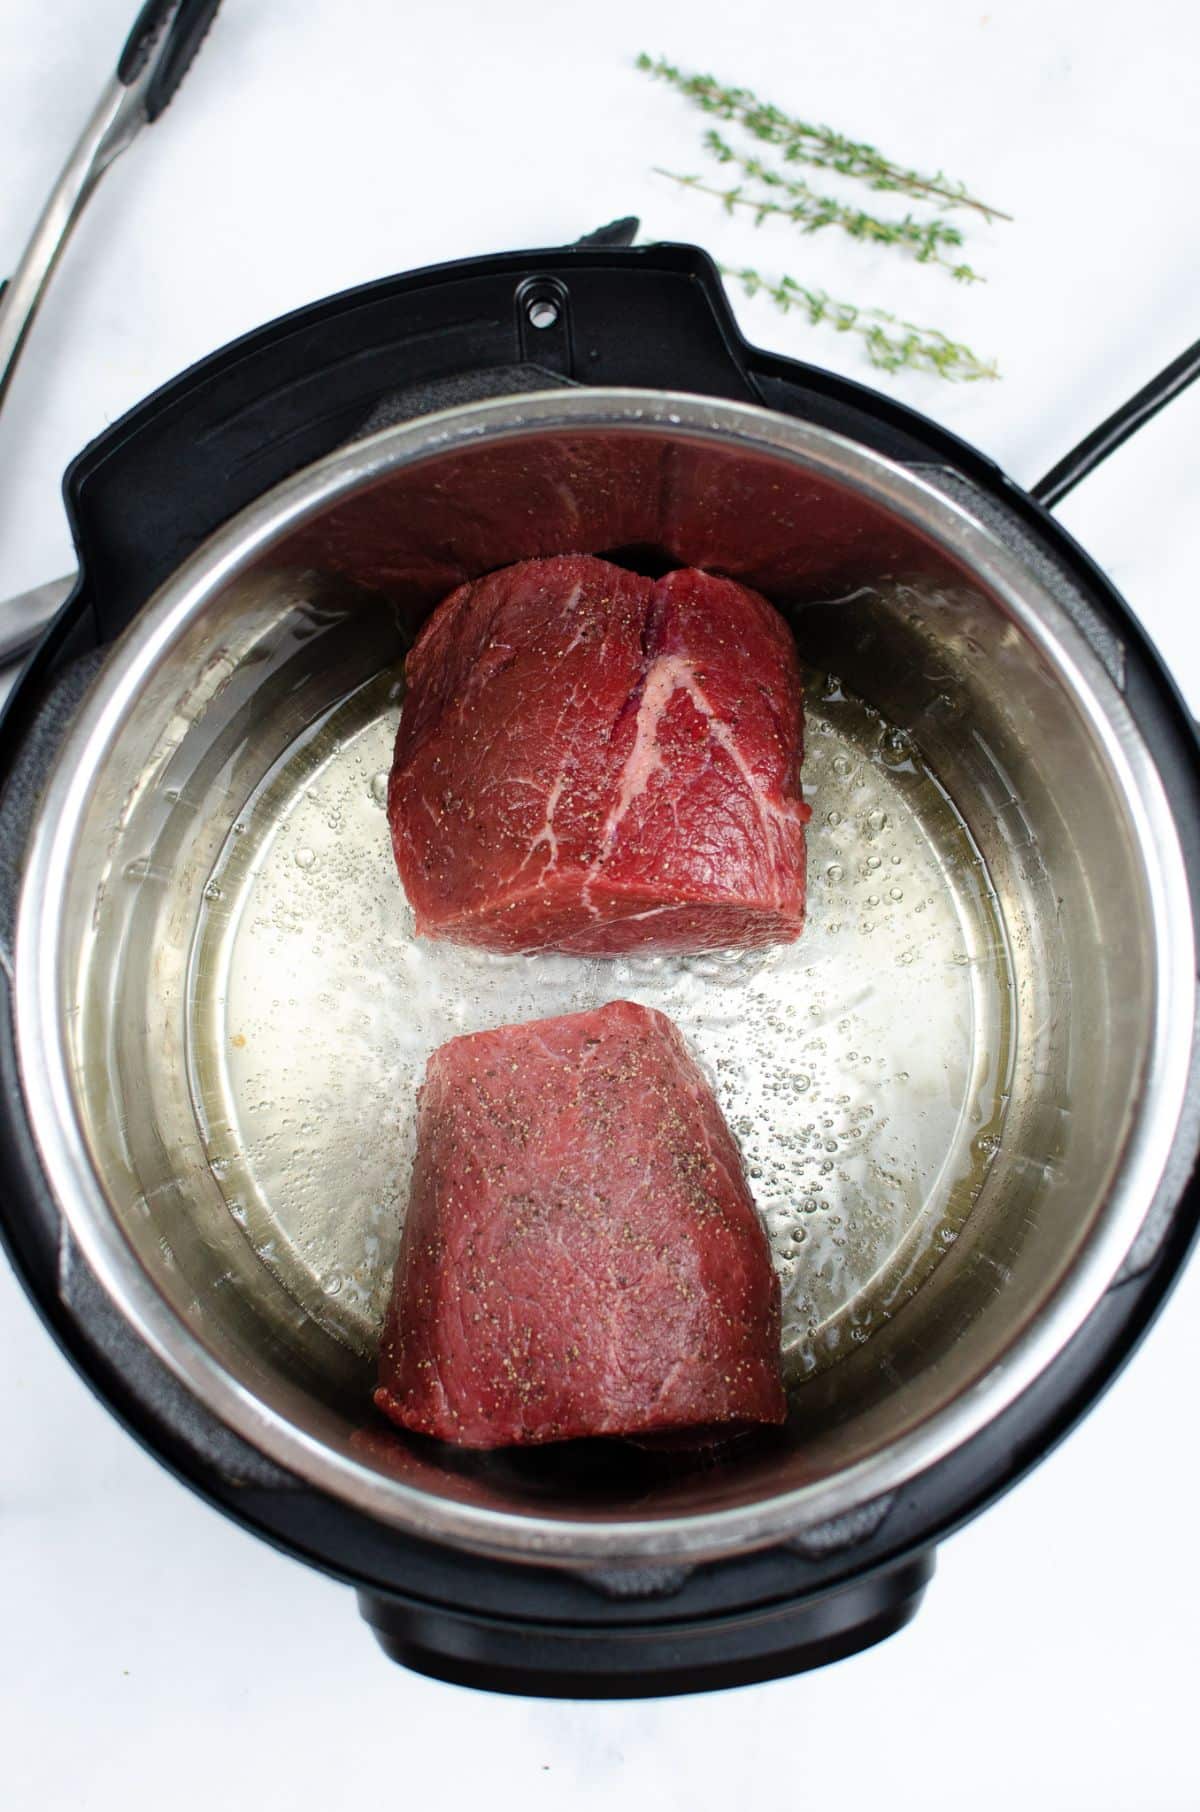 Oil and beef roast in the pressure cooker.